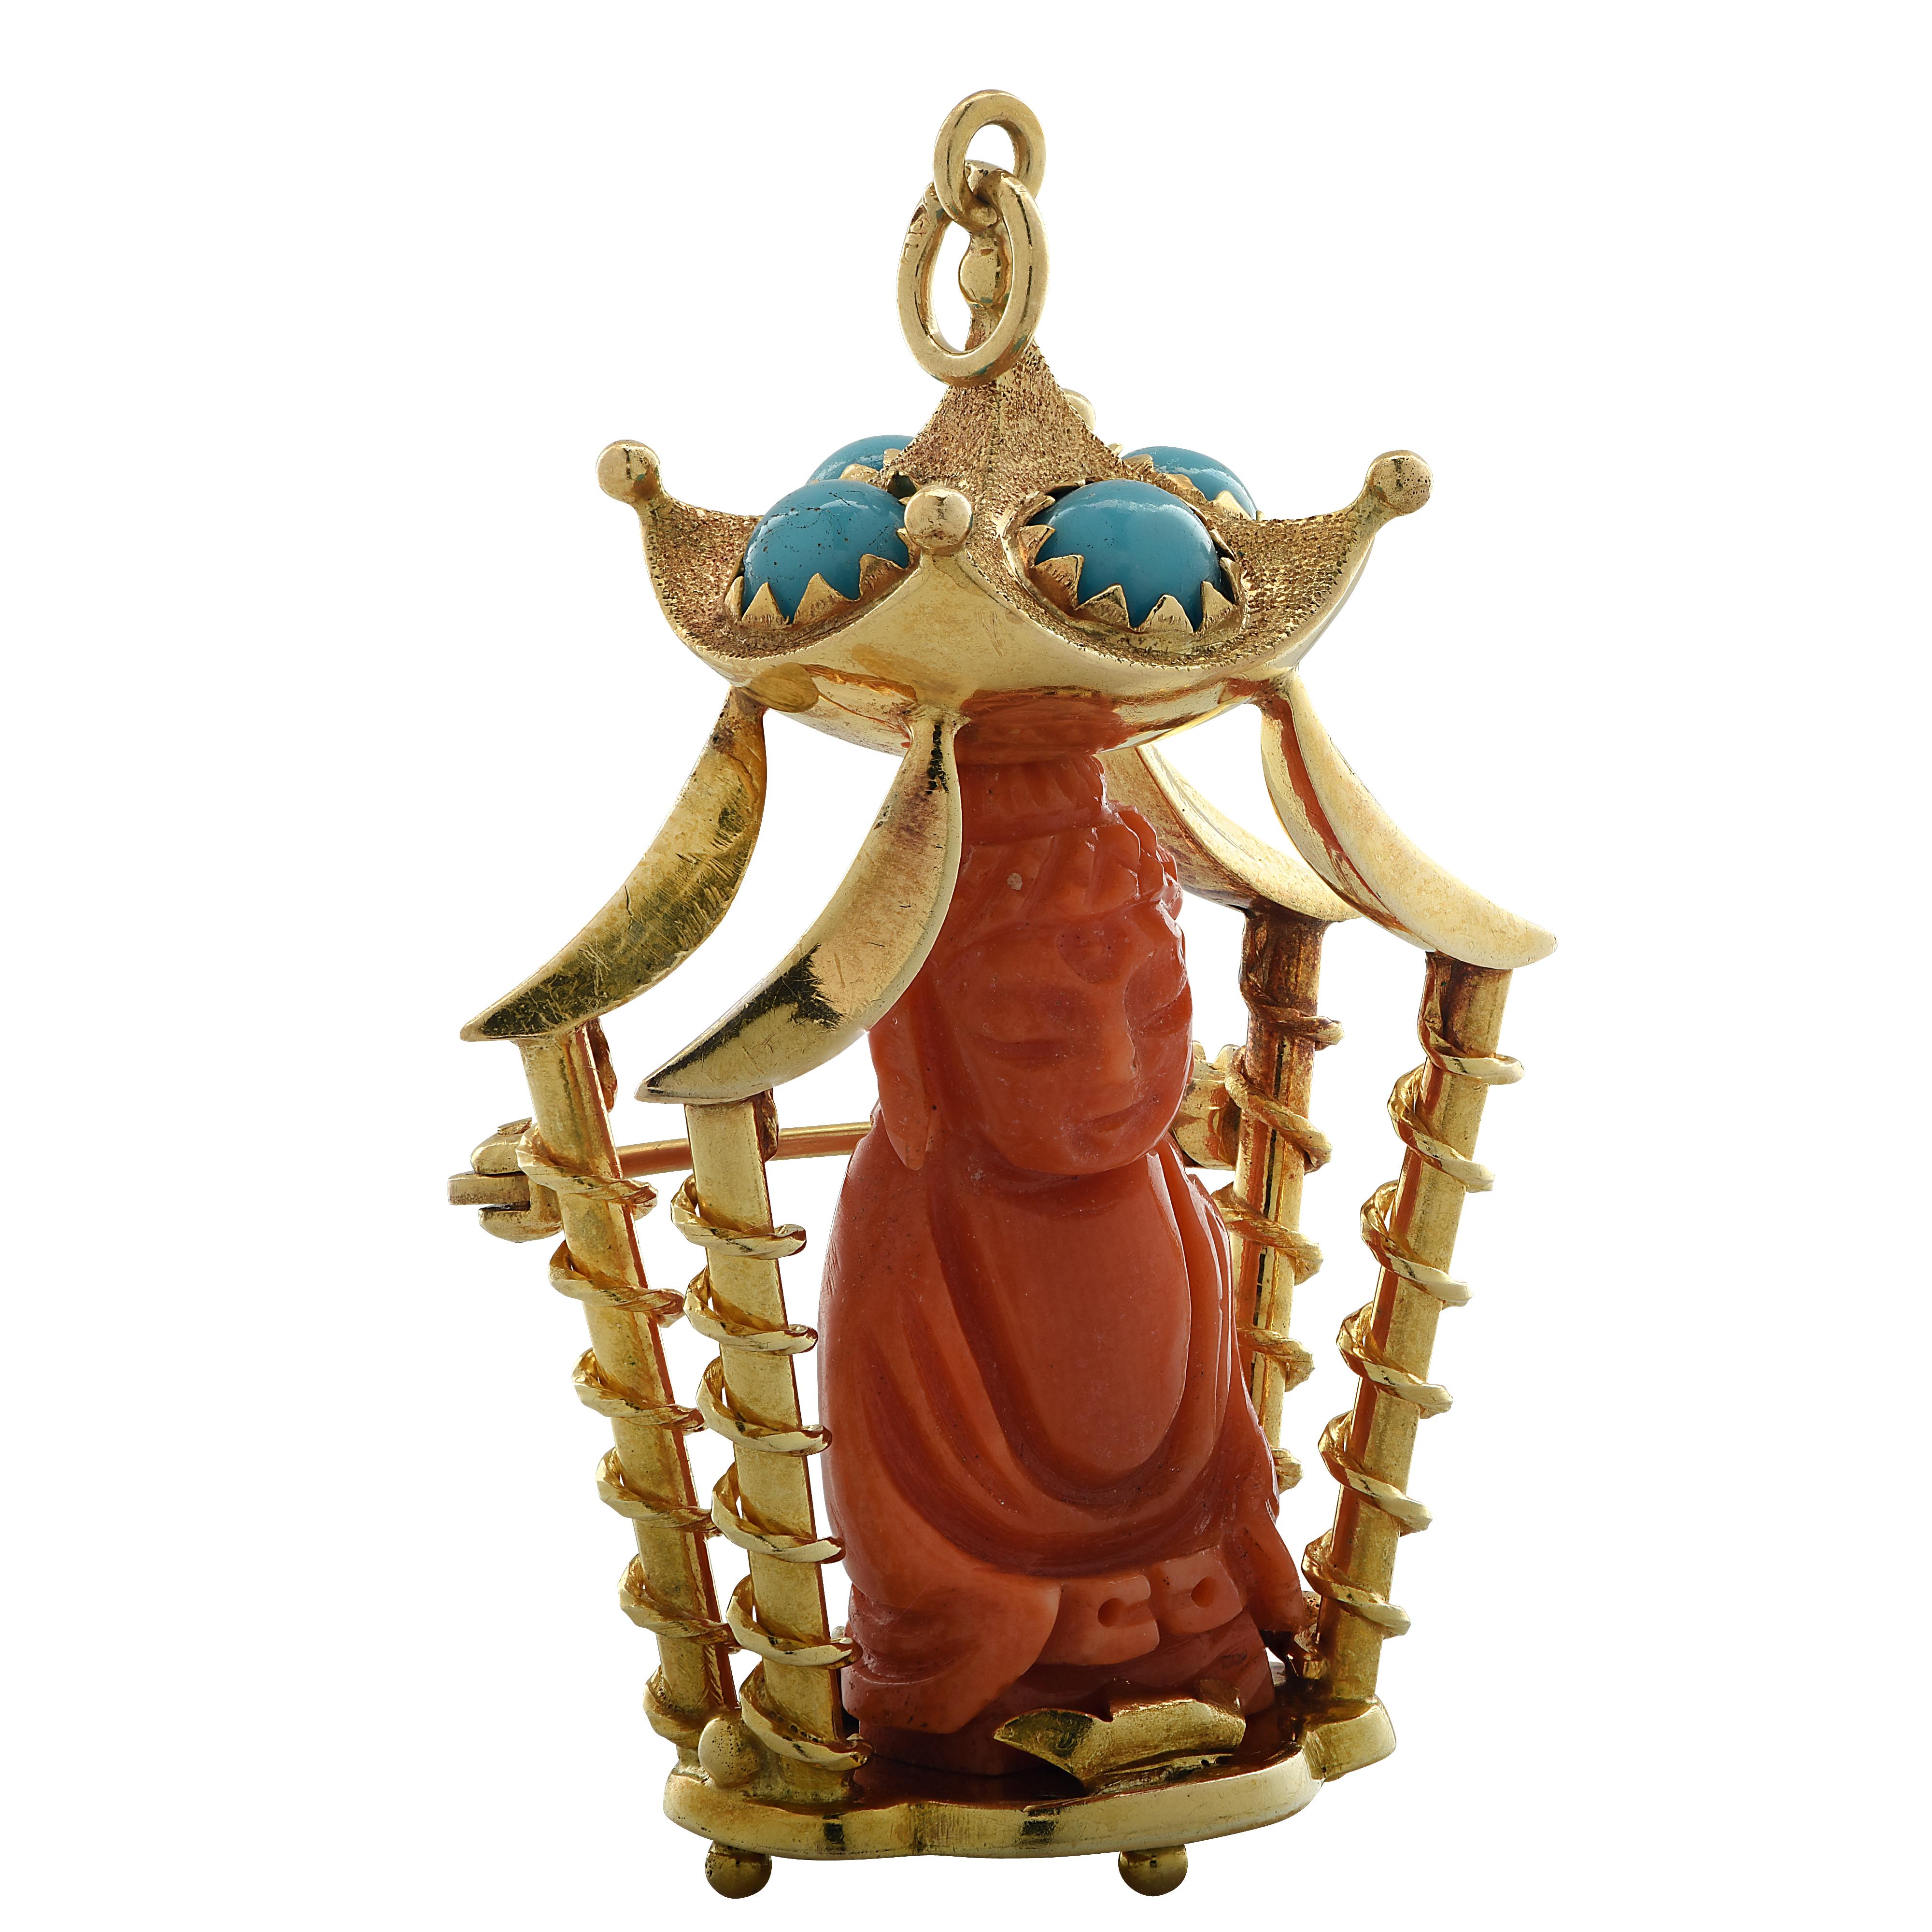 Beautiful brooch pin/pendant crafted in 18 karat yellow gold, featuring a sacred Buddha statue carved from coral, sitting in a pagoda adorned with 4 round turquoise beads. This serene brooch pin/pendant measures 1.8 inches in length, 1.1 inches at